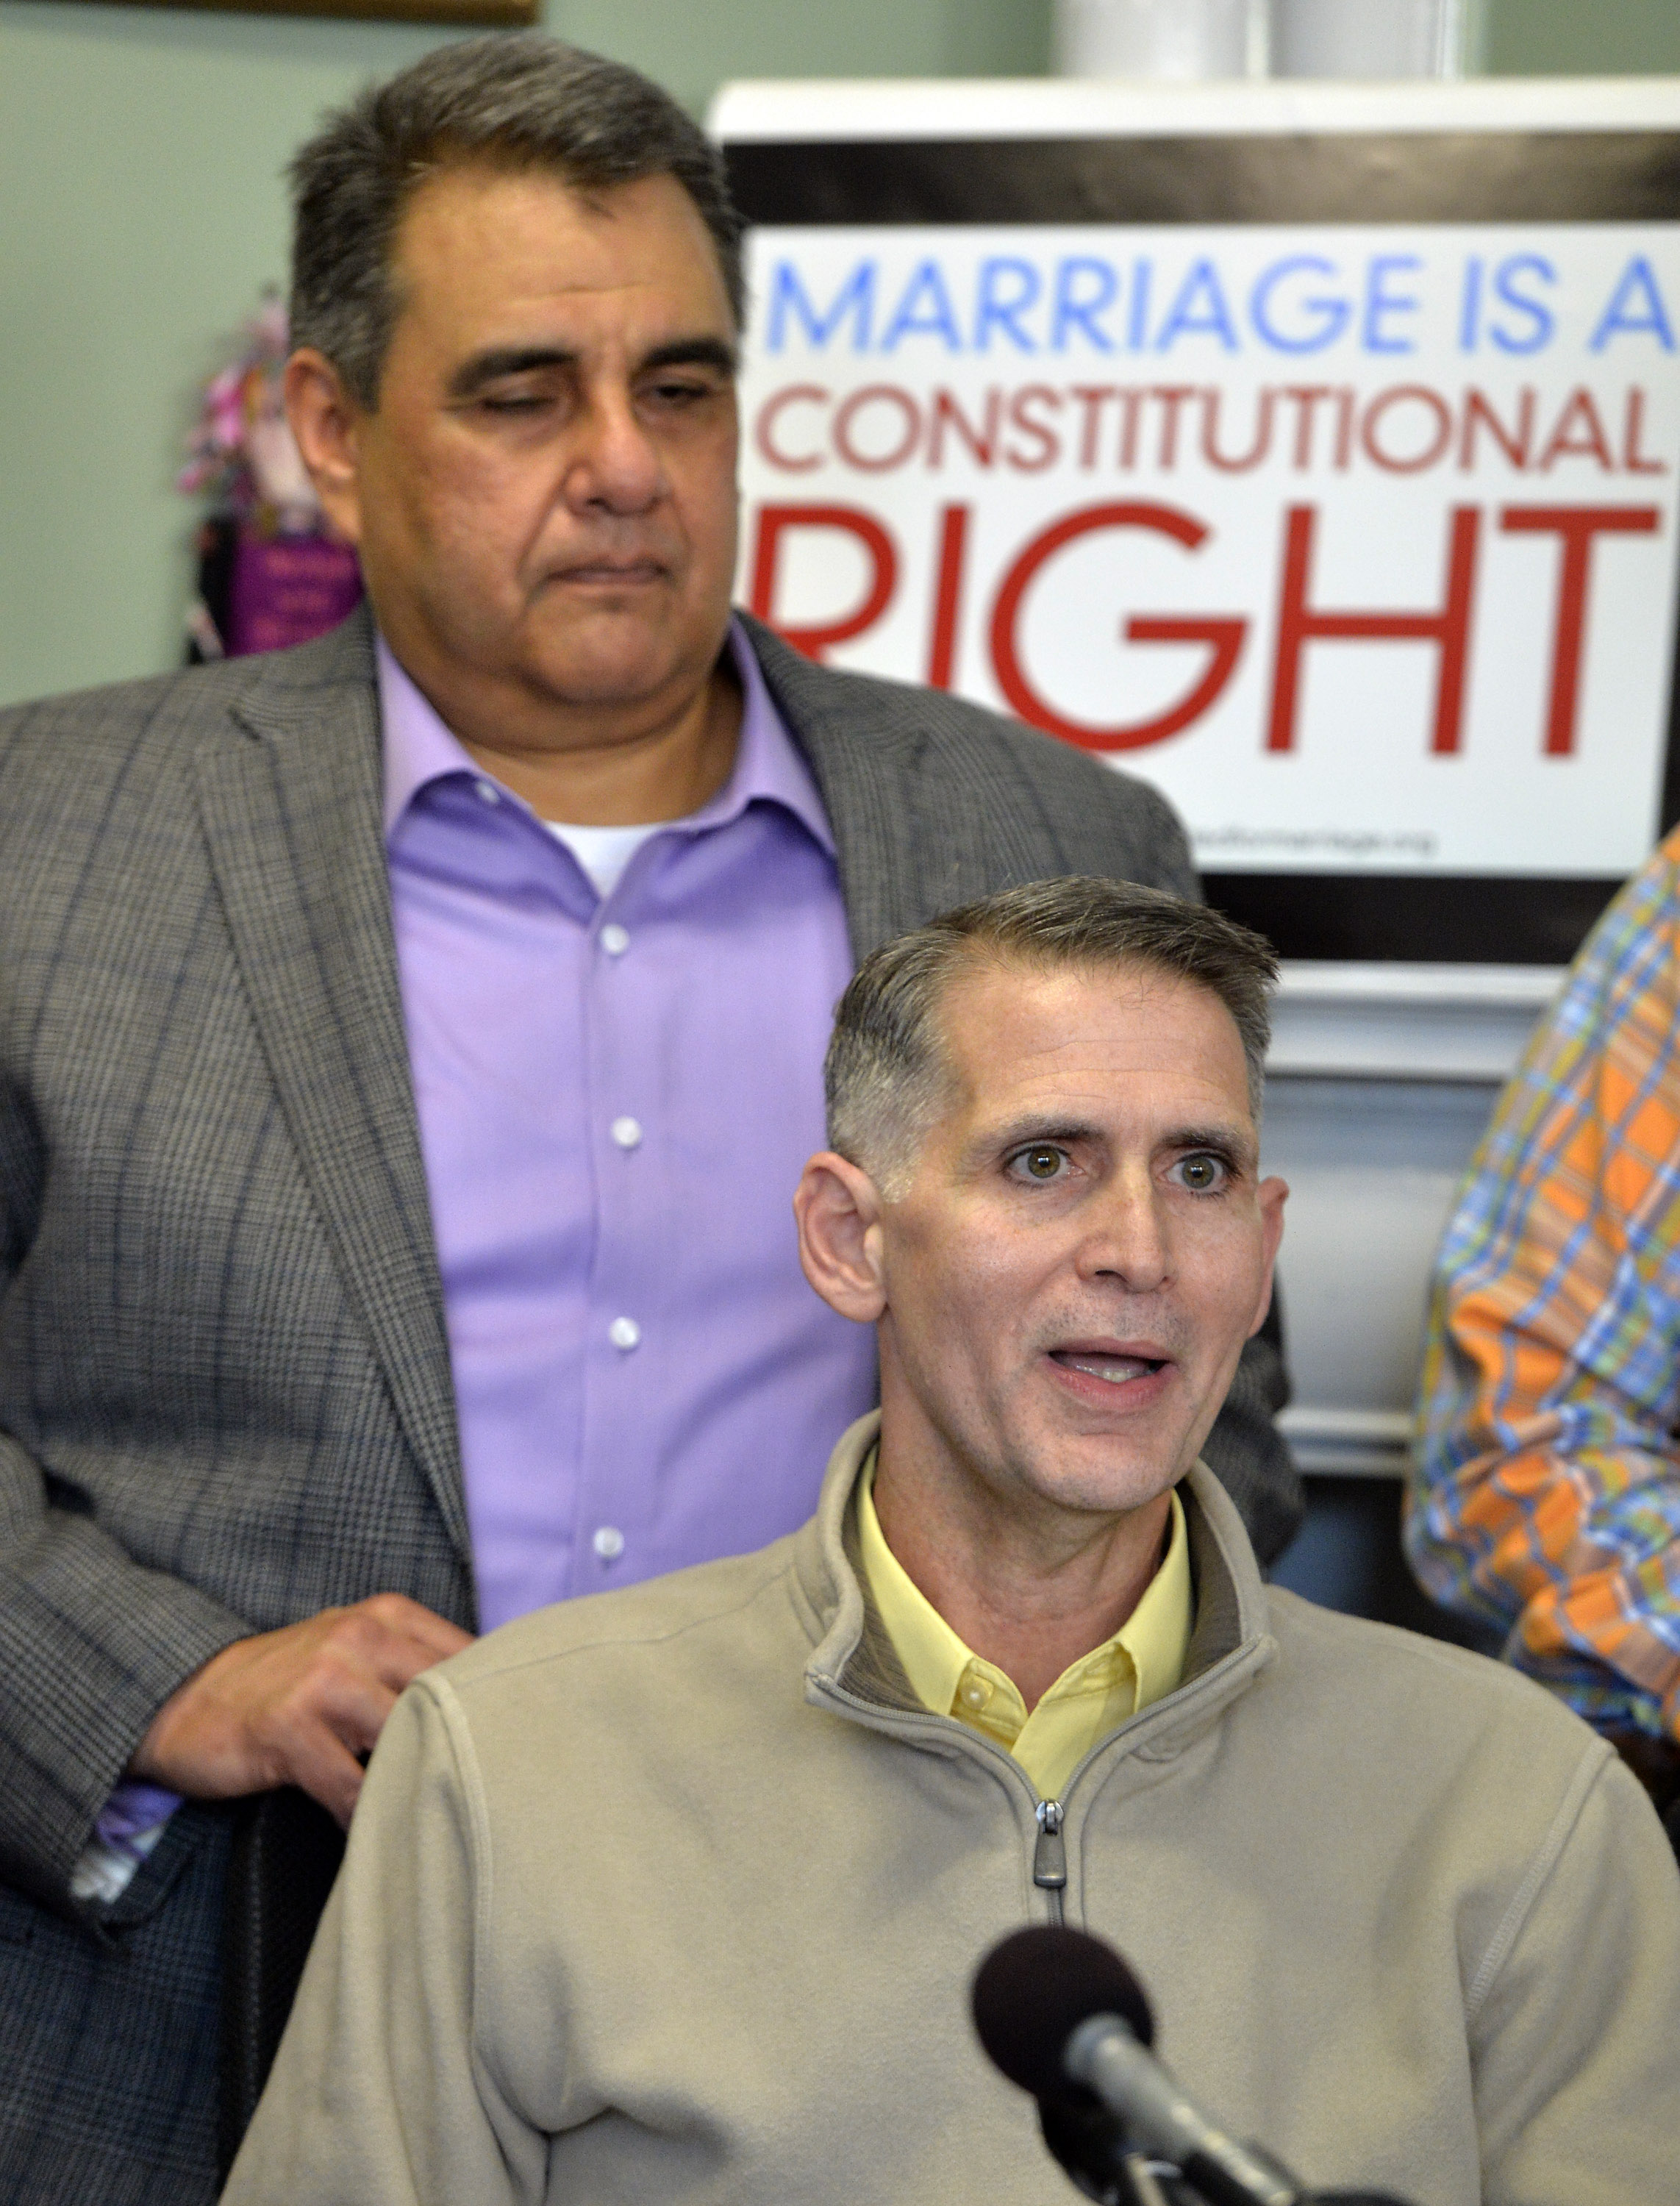 Greg Bourke, front, and his partner Michael Deleon speak to reporters following the announcement from U.S. District Judge John G. Heyburn striking down Kentucky's same-sex marriage ban Wednesday, Feb. 12, 2014, in Louisville, Ky.